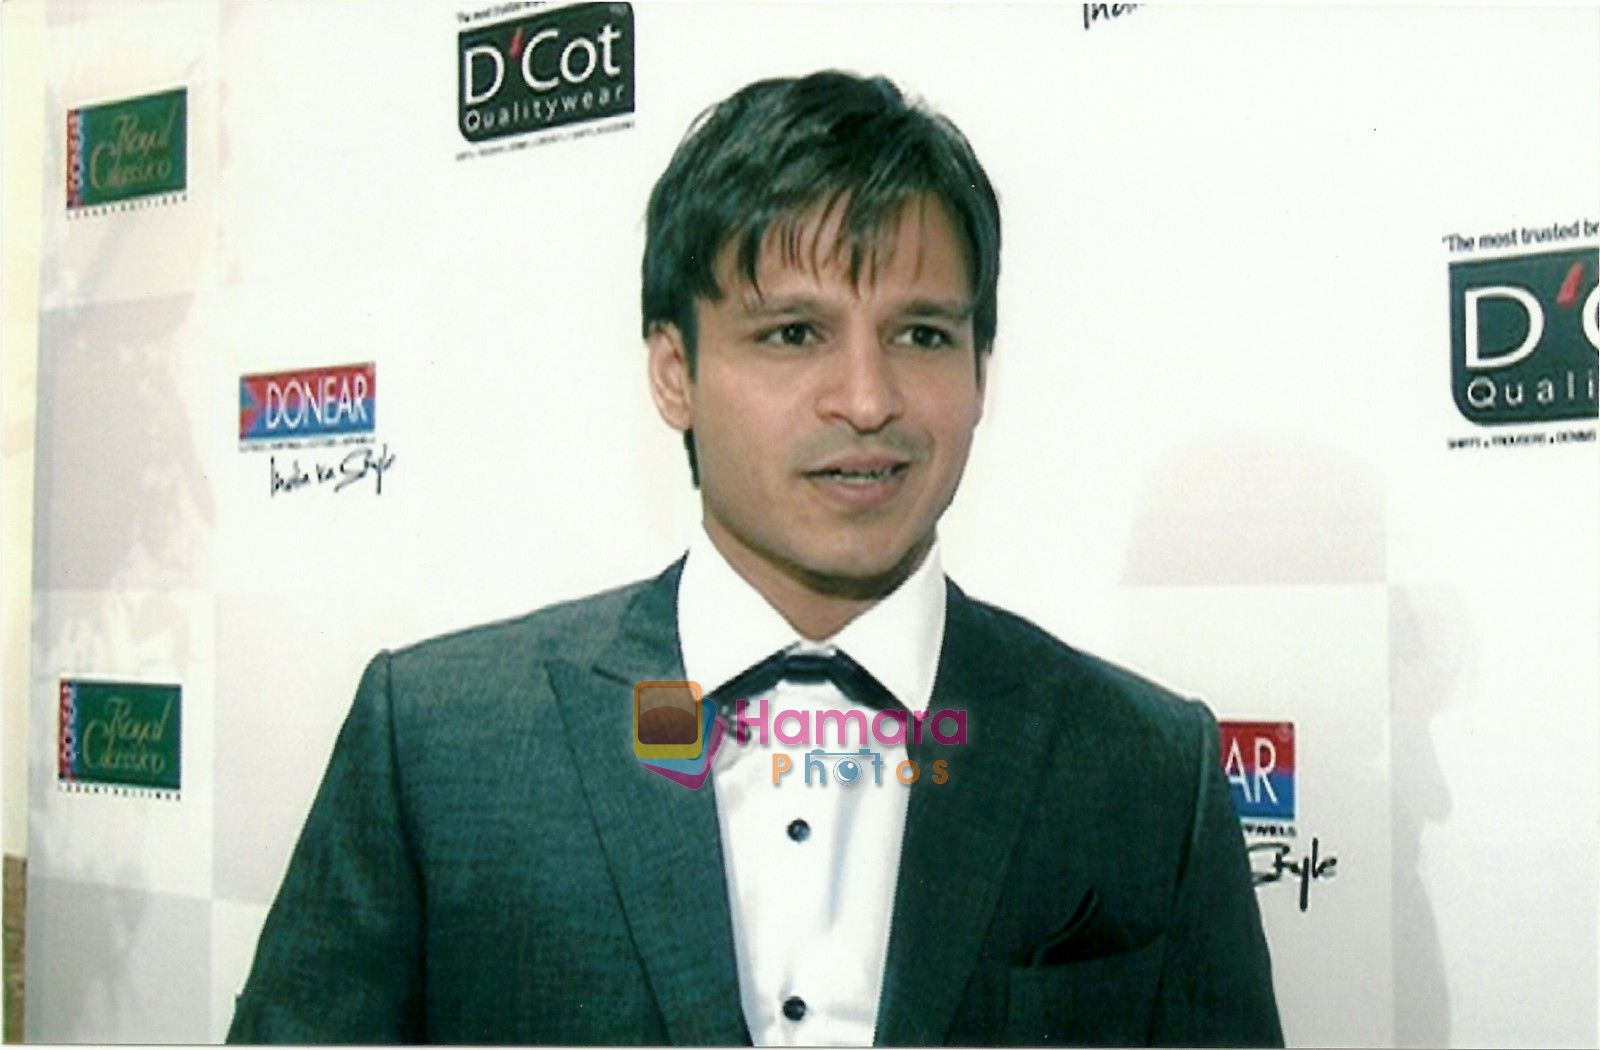 Vivek Oberoi Becomes The Brand Ambassador for Donear Suitings And D'Cot Fabrics 